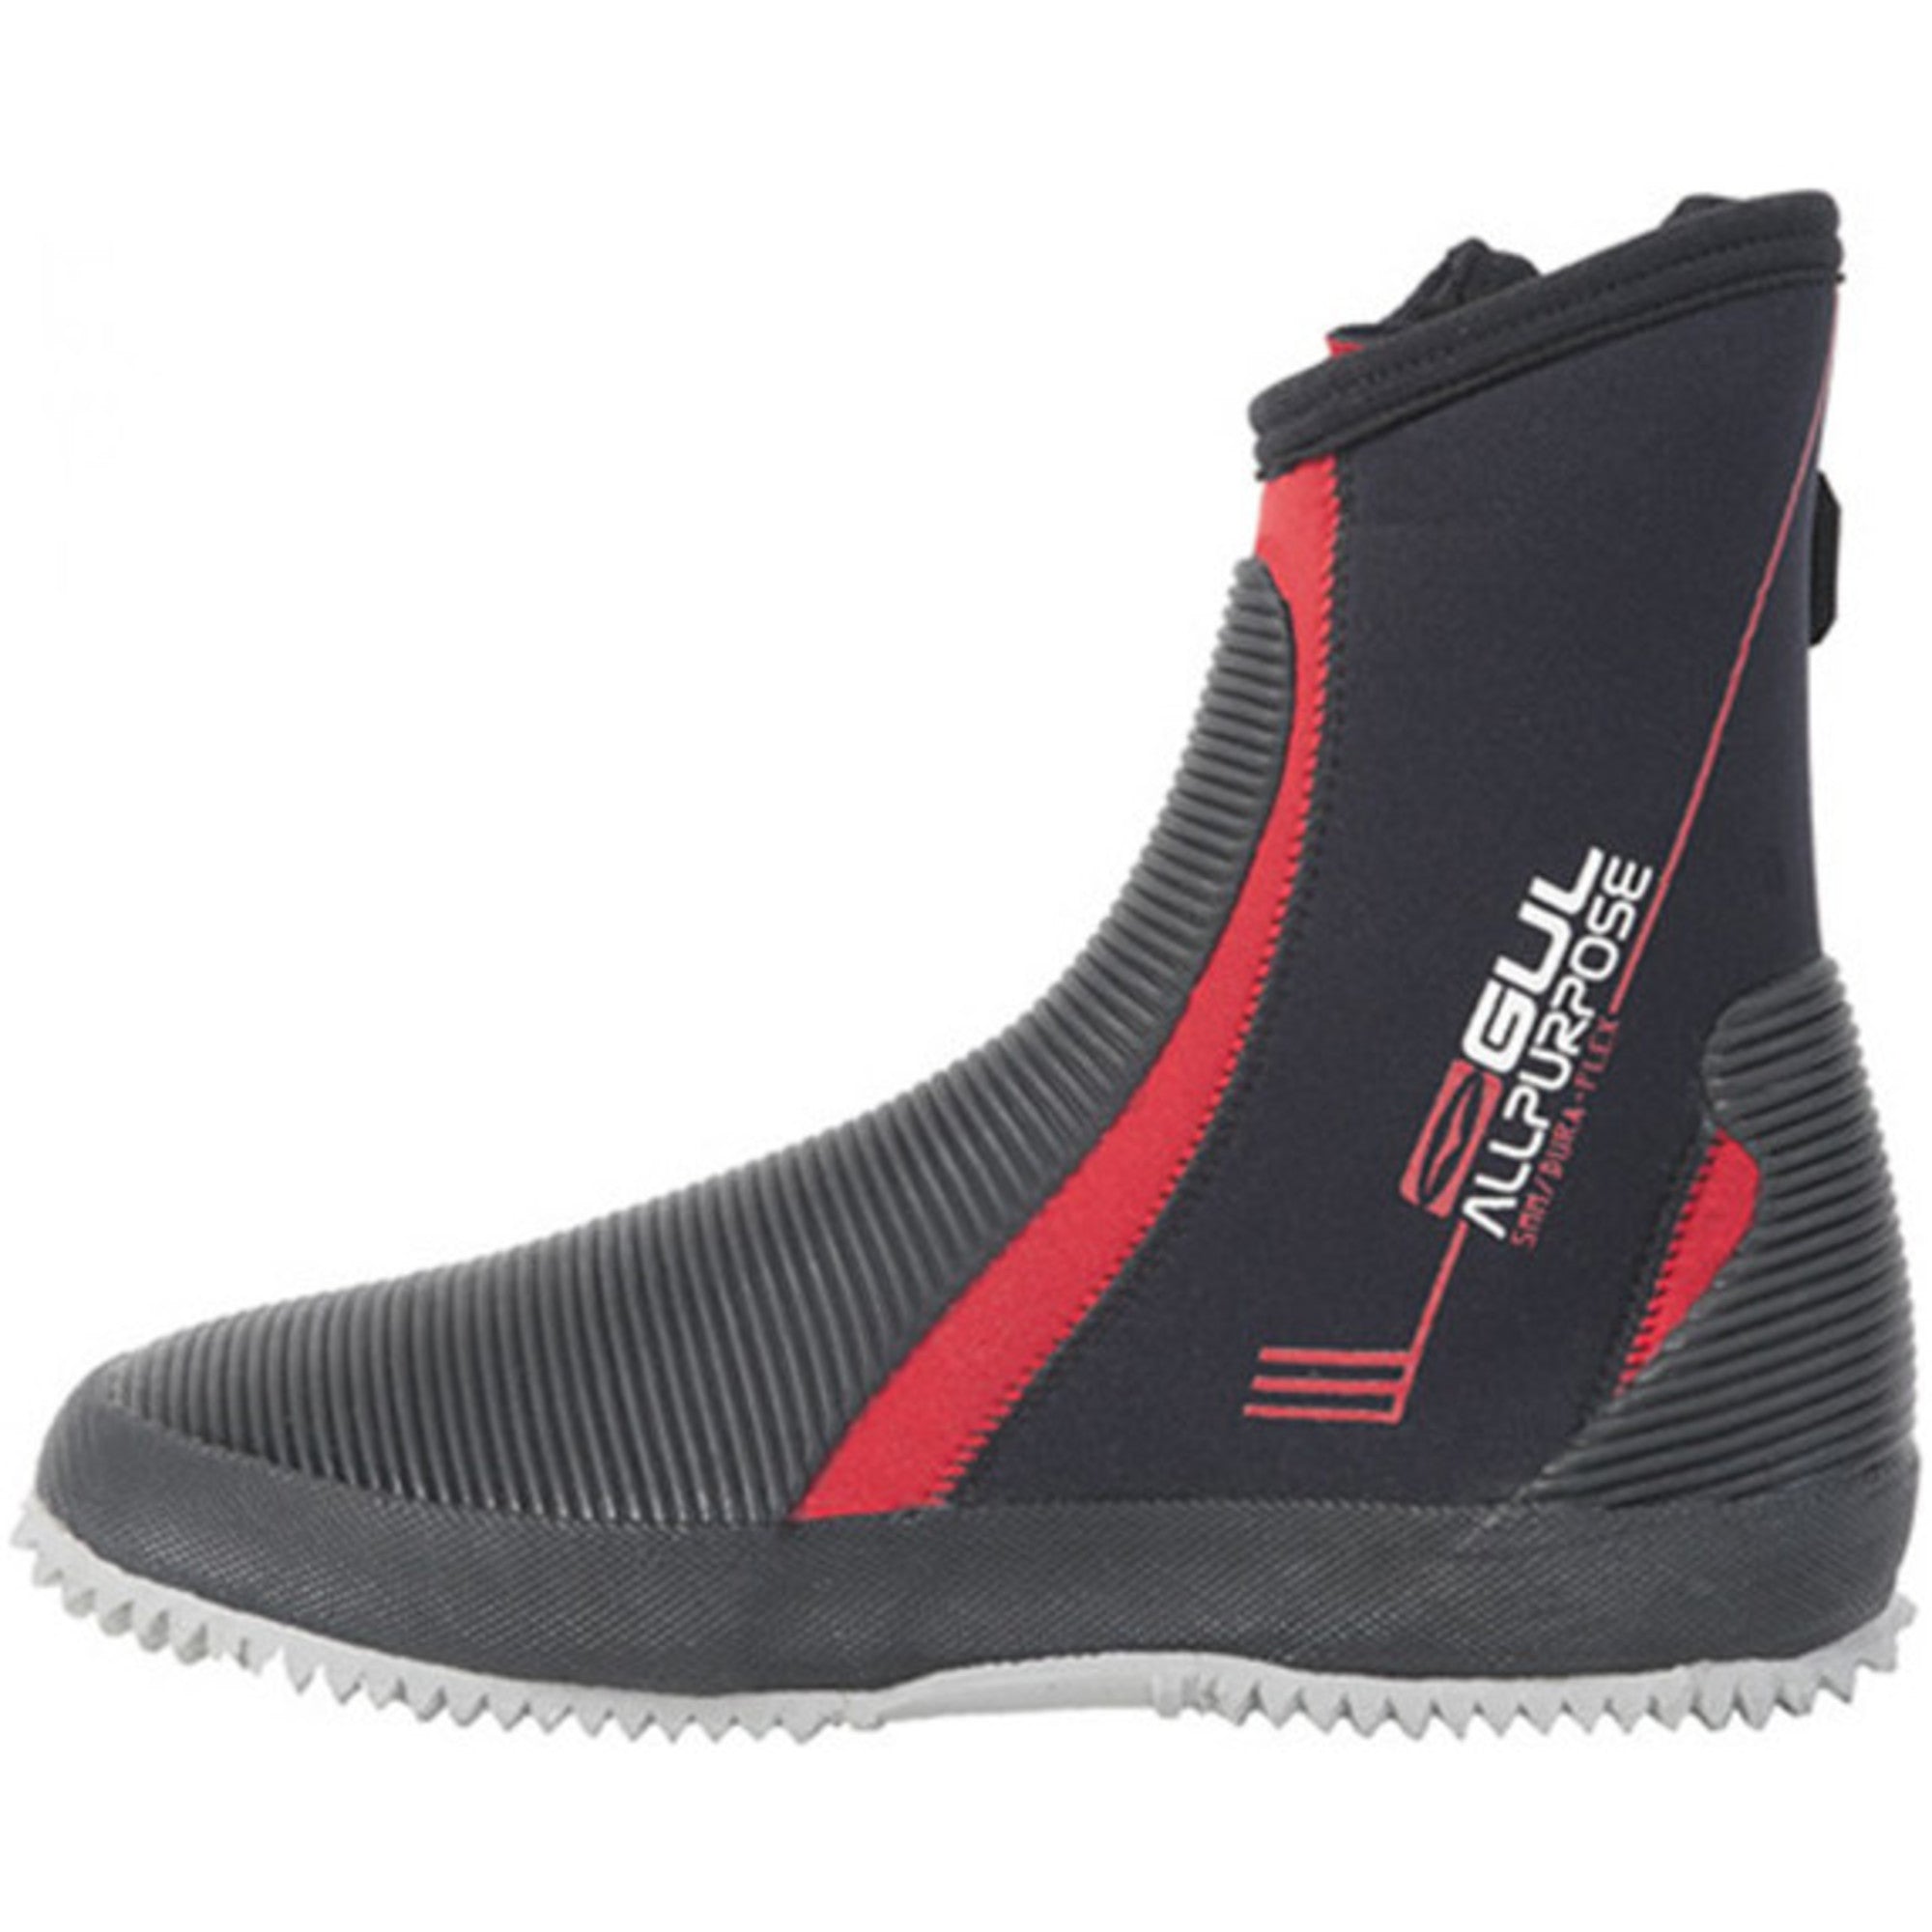 All Purpose Boots Black/Red